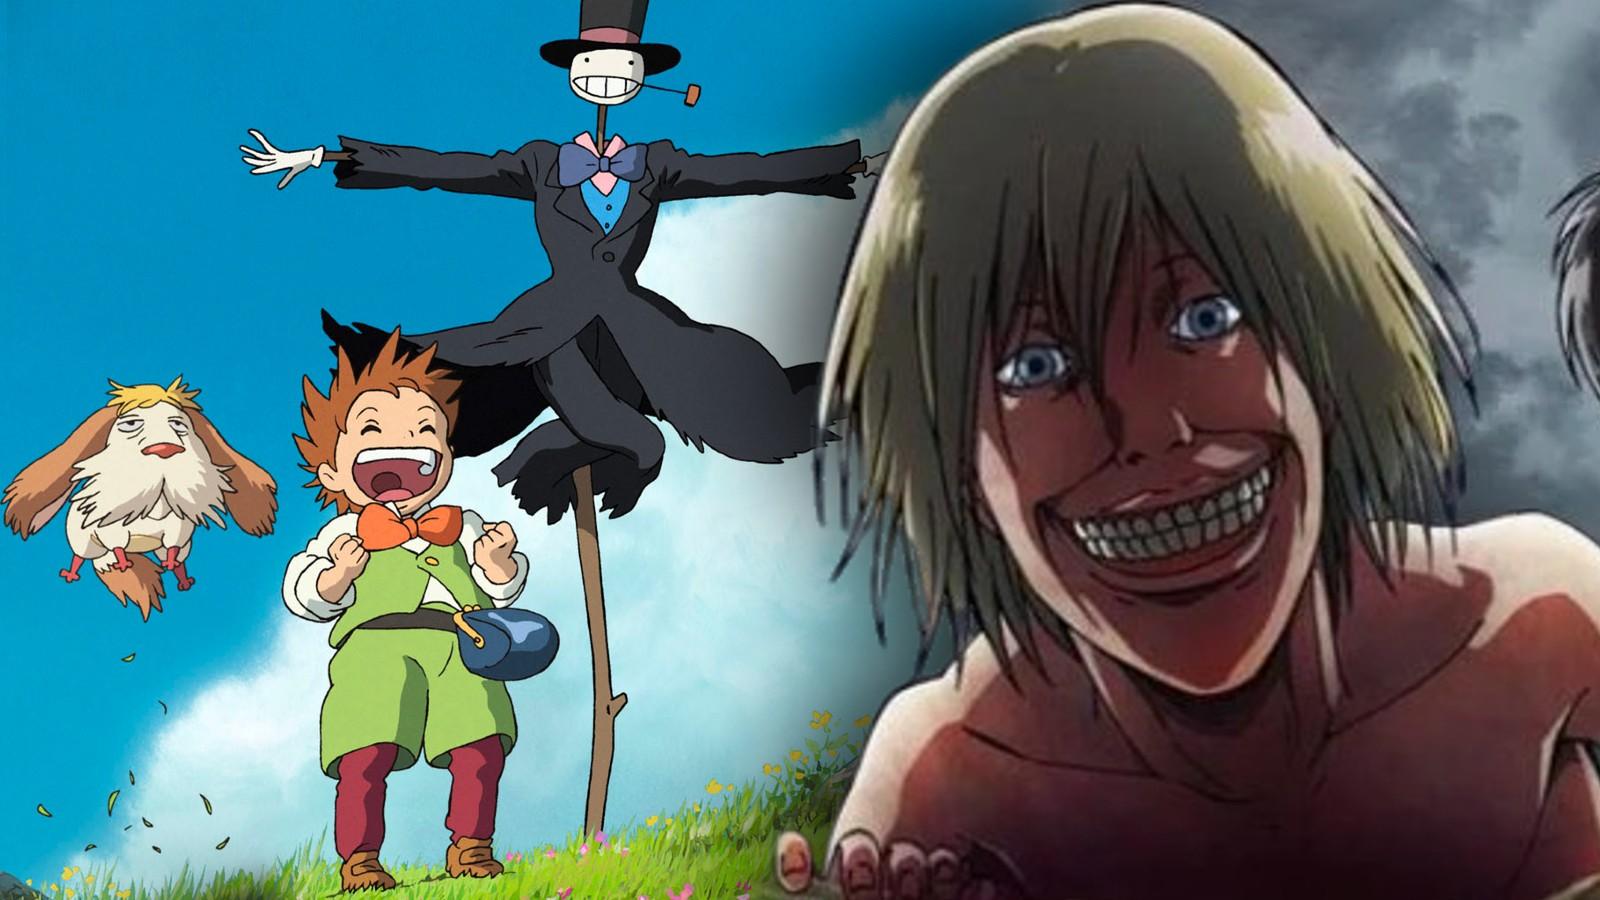 Stills from Howl's Moving Castle and Attack on Titan